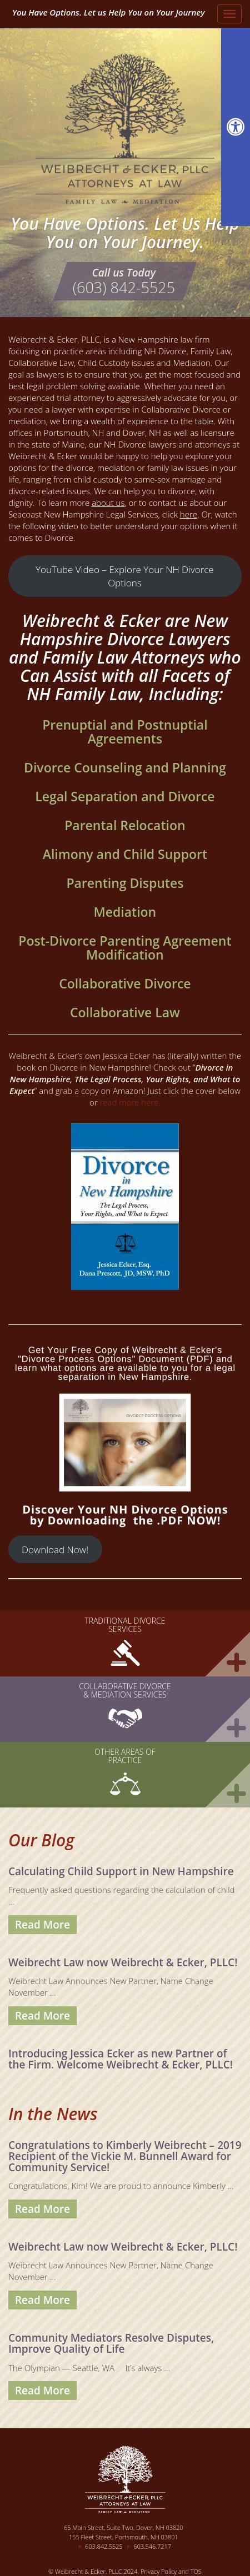 Weibrecht & Reis, PLLC - Dover NH Lawyers